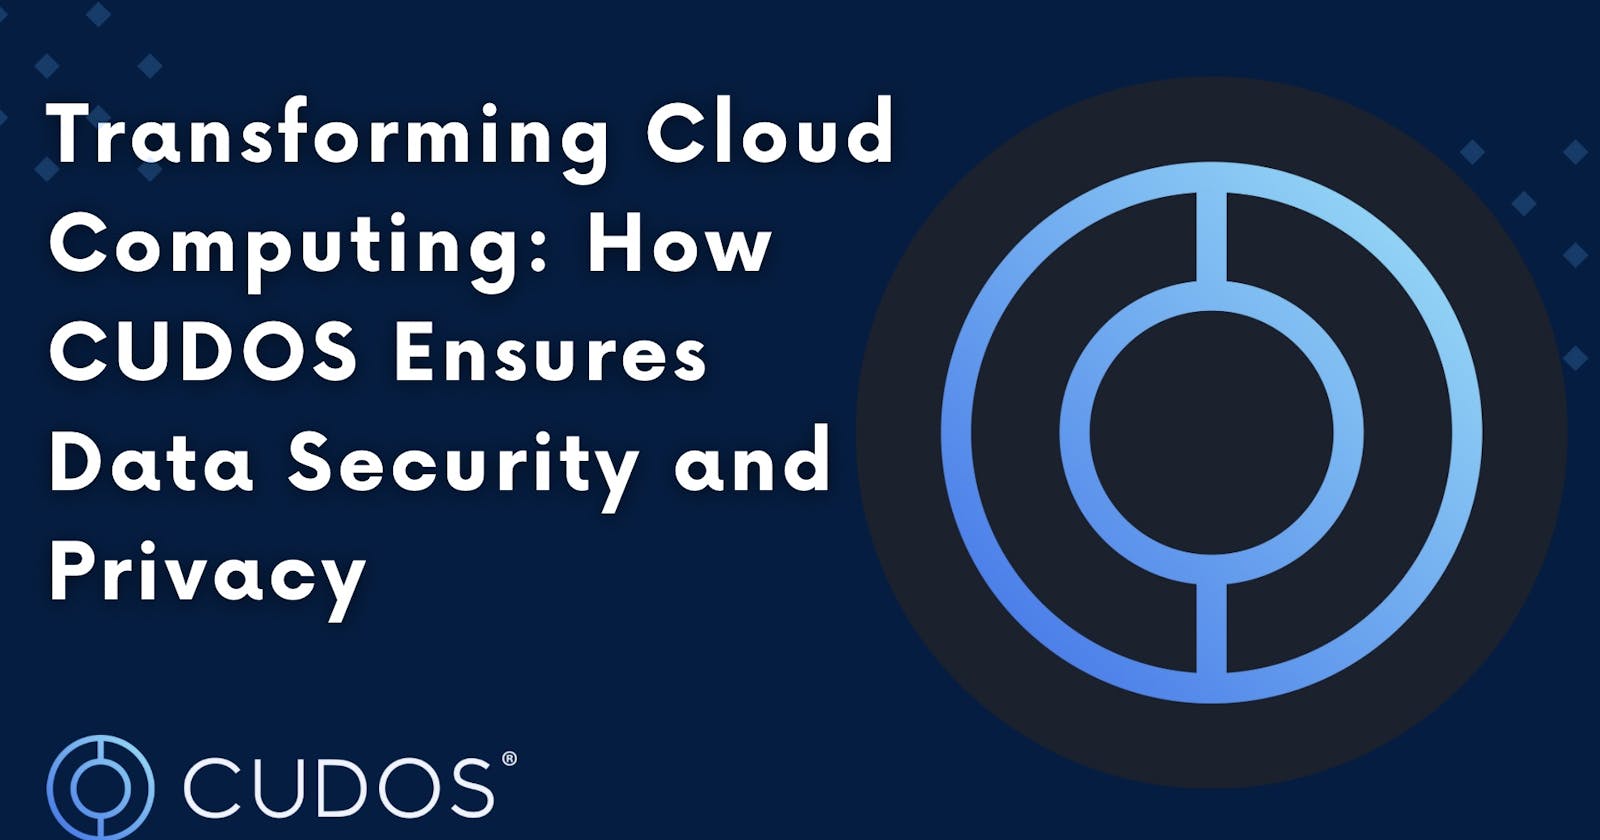 Transforming Cloud Computing: How CUDOS Ensures Data Security and Privacy